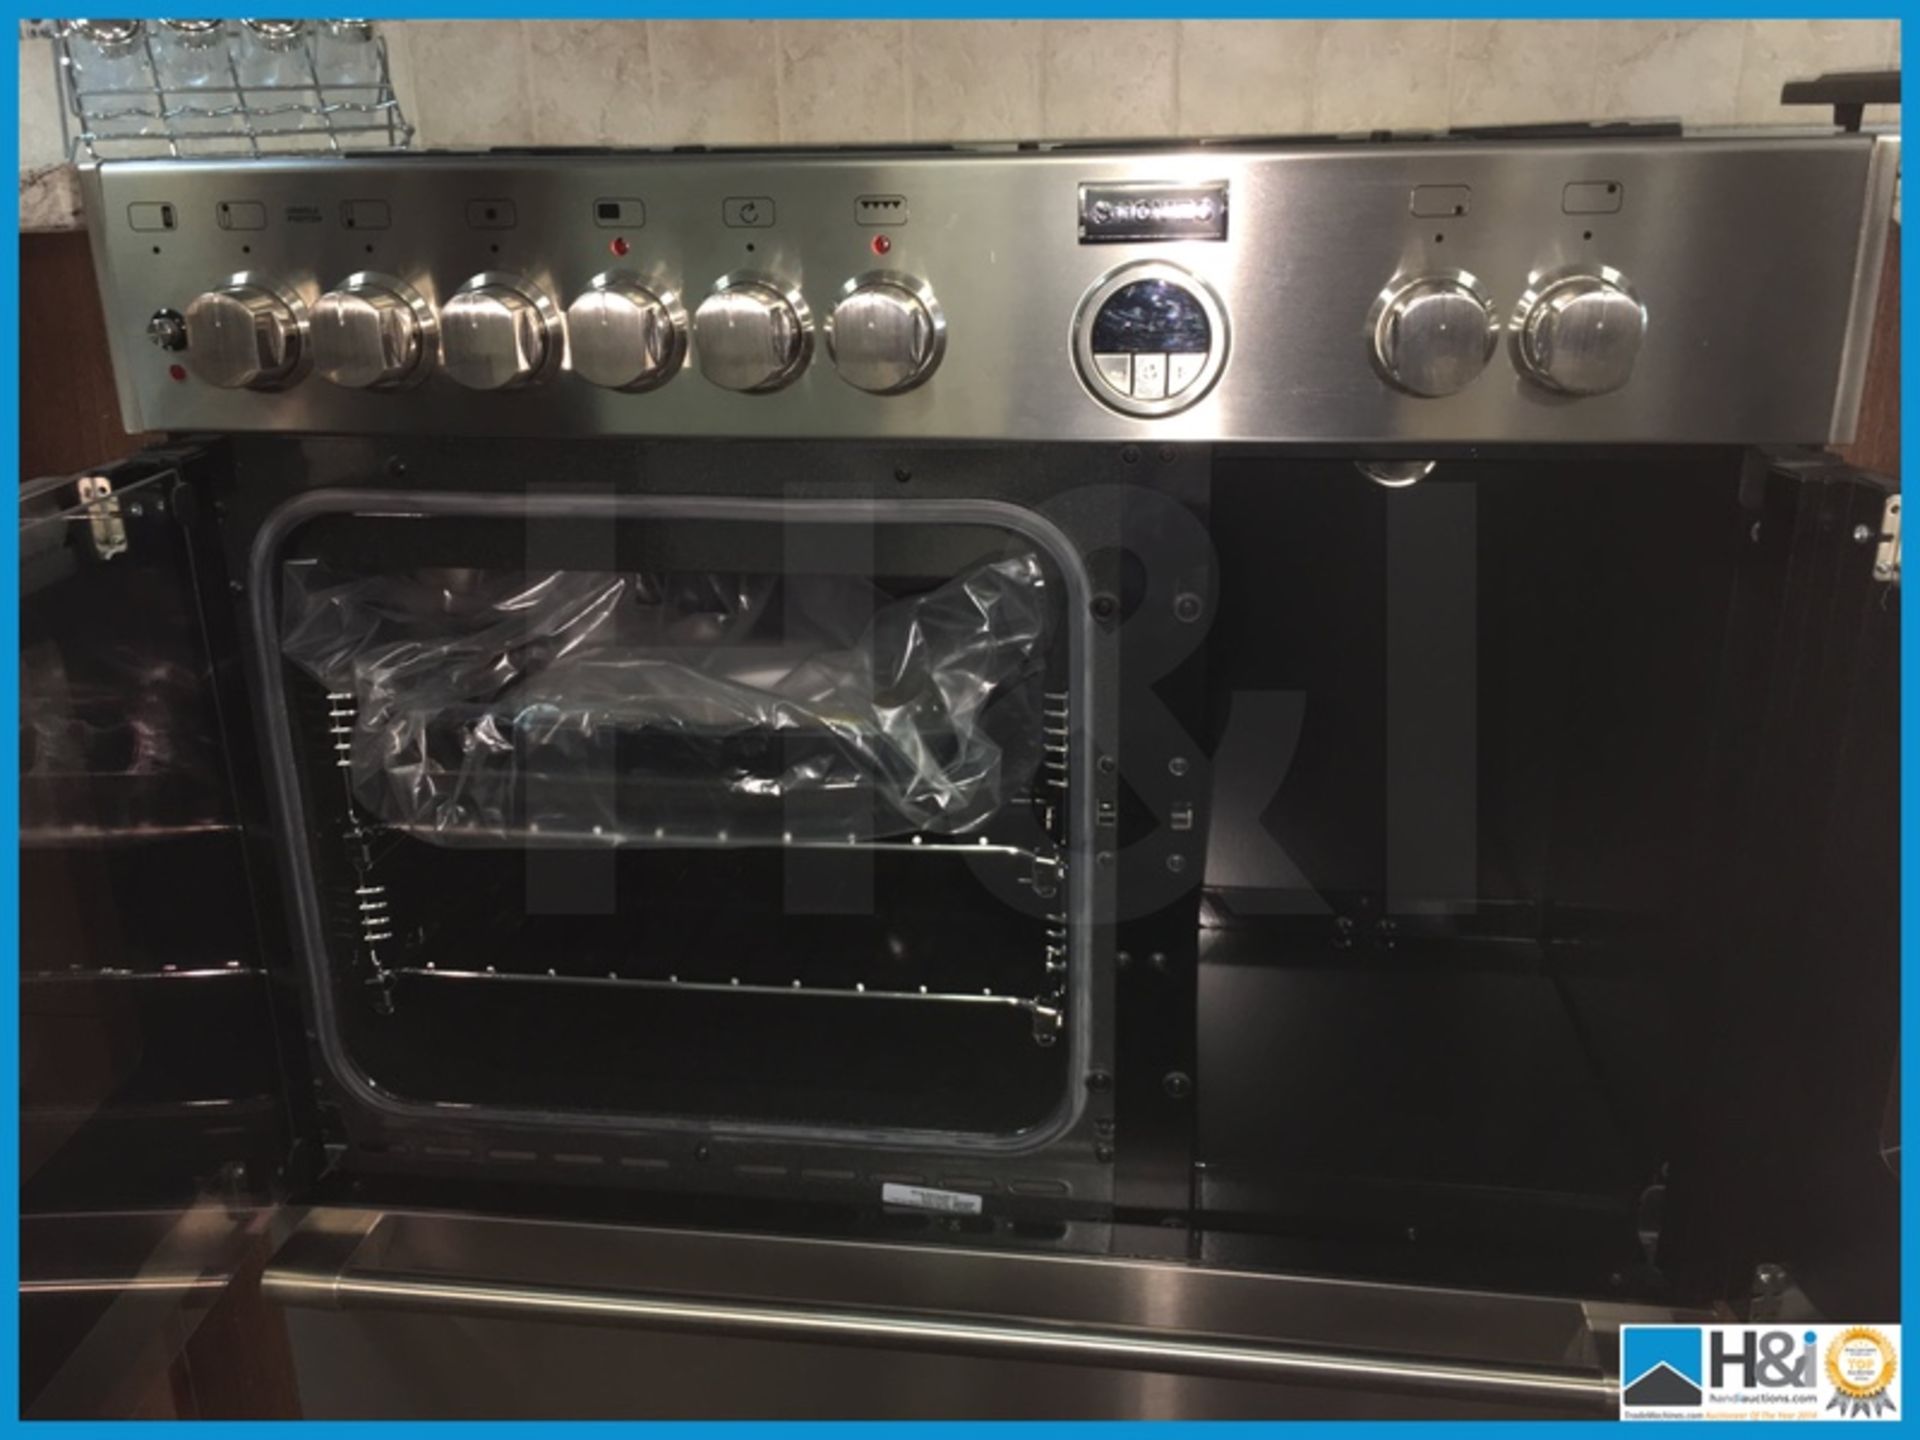 Stoves stainless steel double oven 800 wide with 5 gas burners and lower pan storage. Also - Image 4 of 7